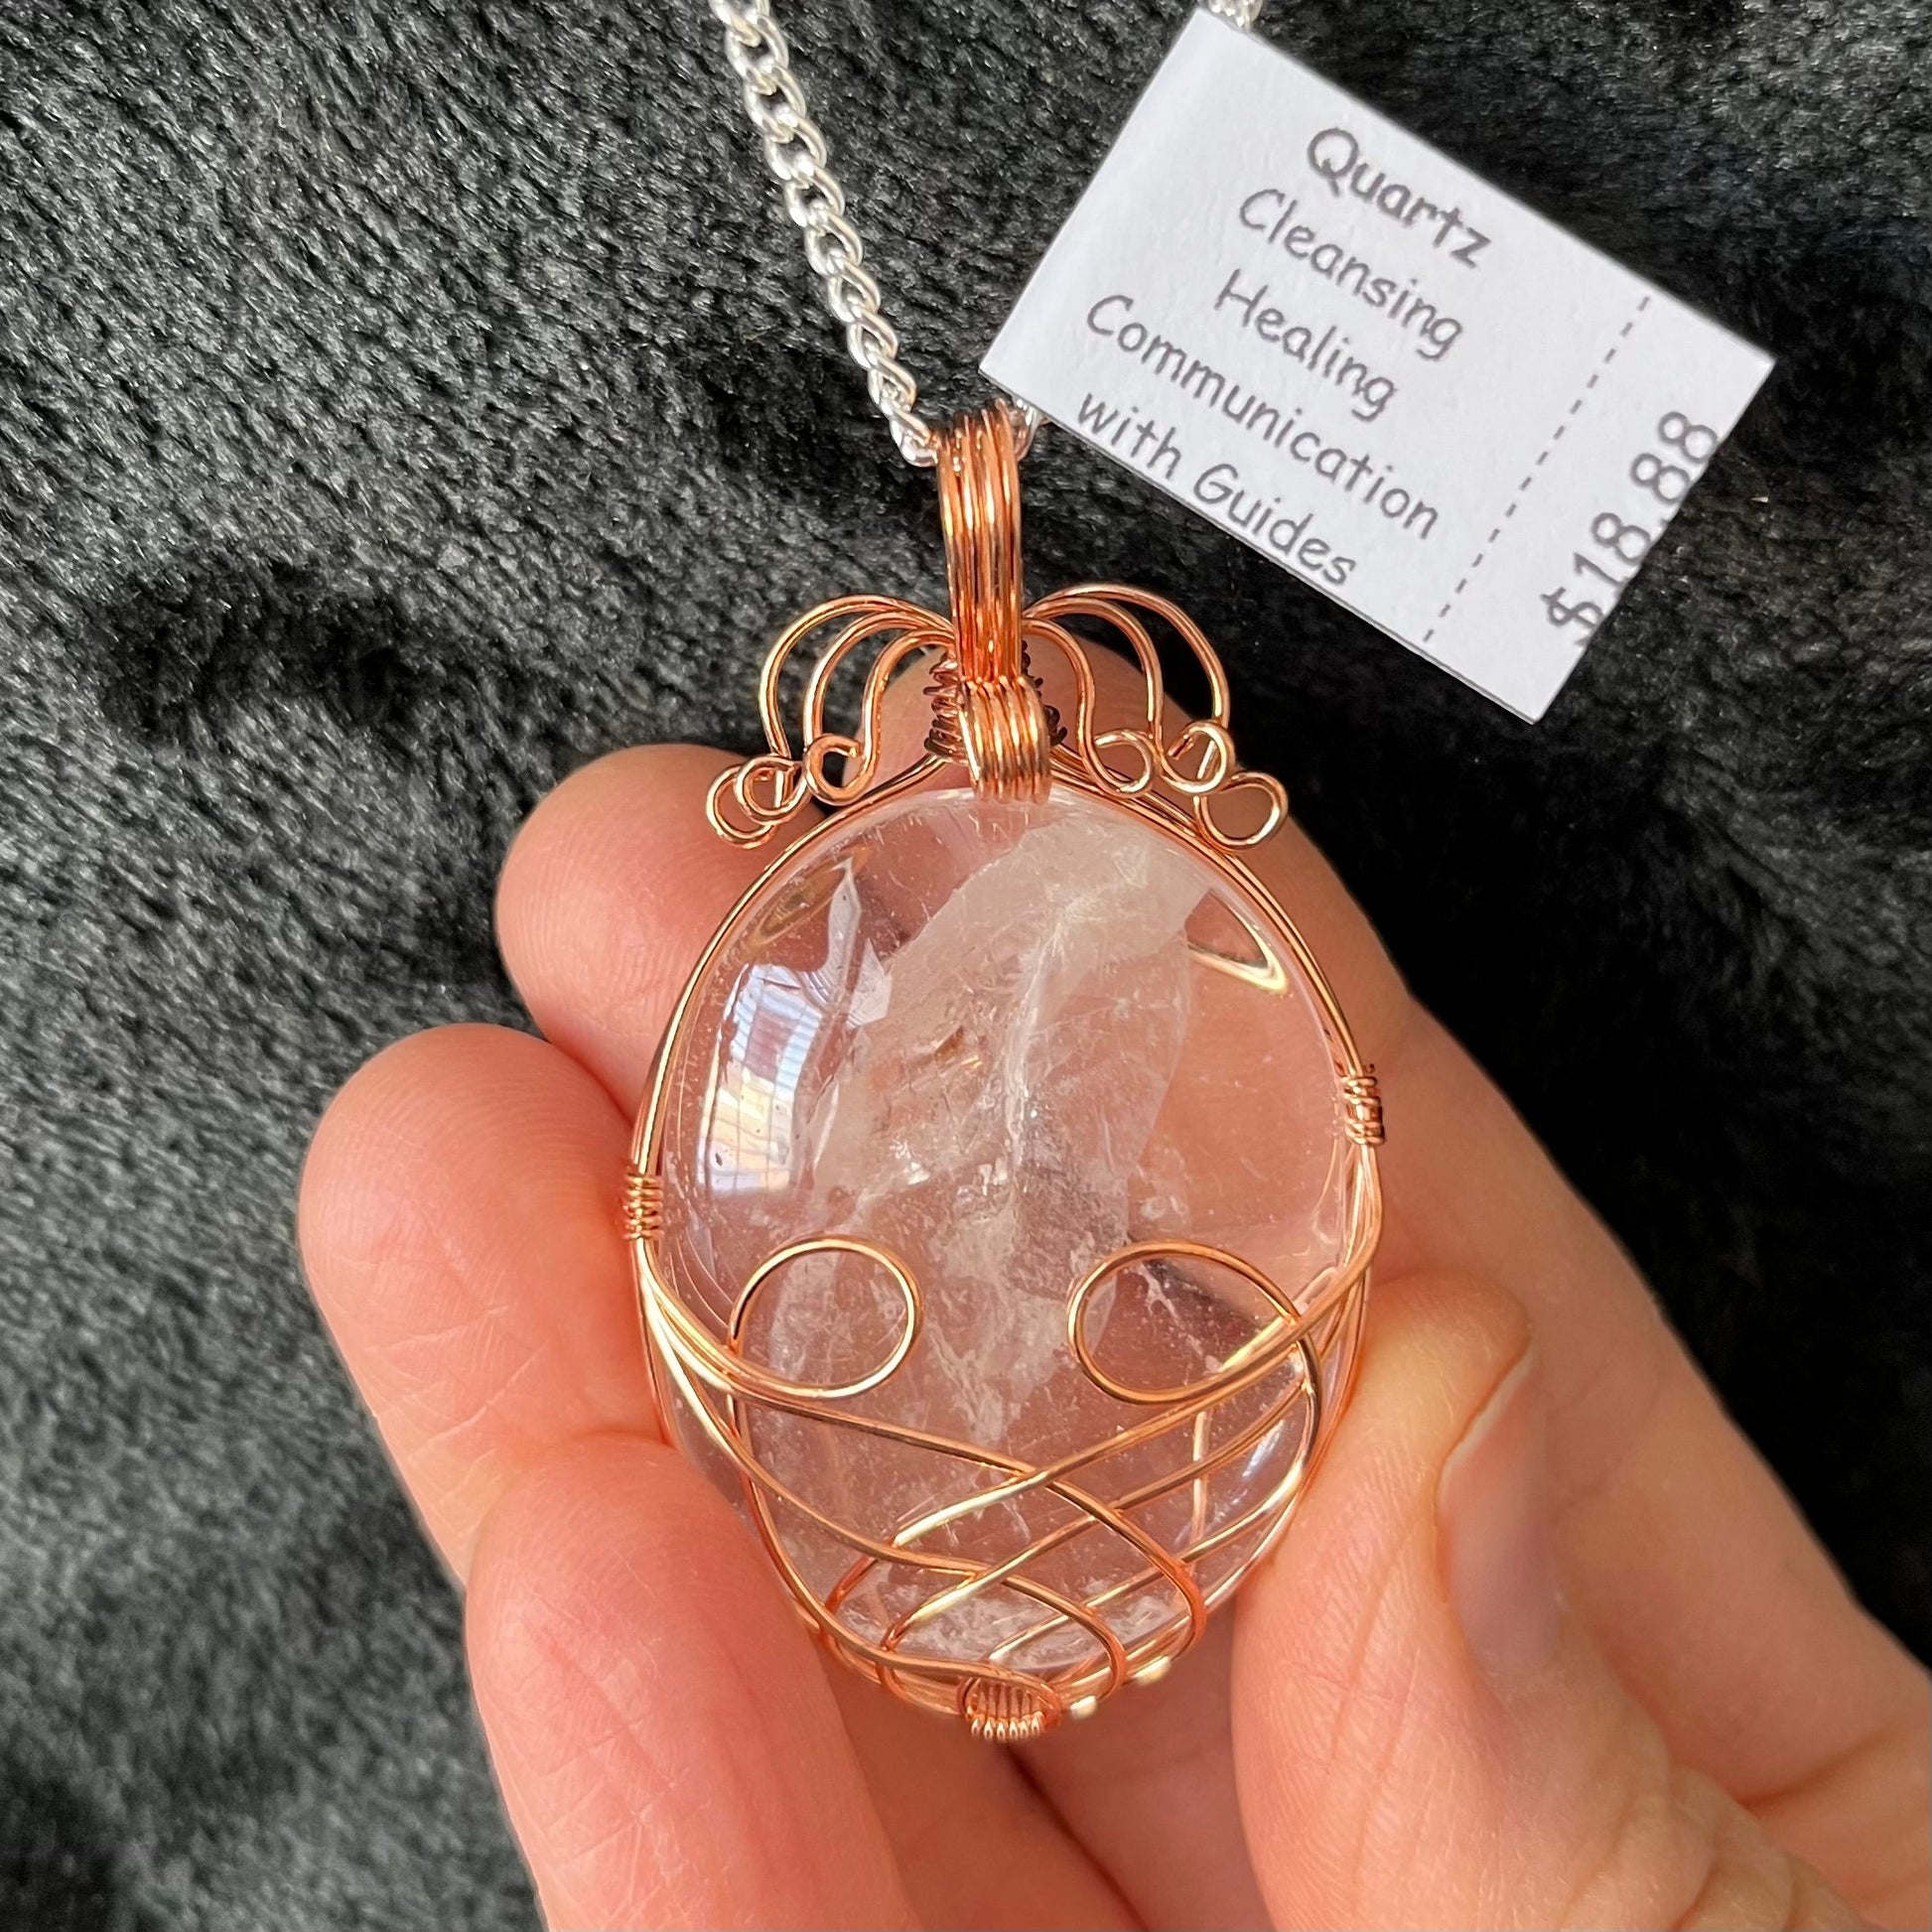  Fancy copper wire wrapped clear quartz oval stone pendant attatched to a silver chain